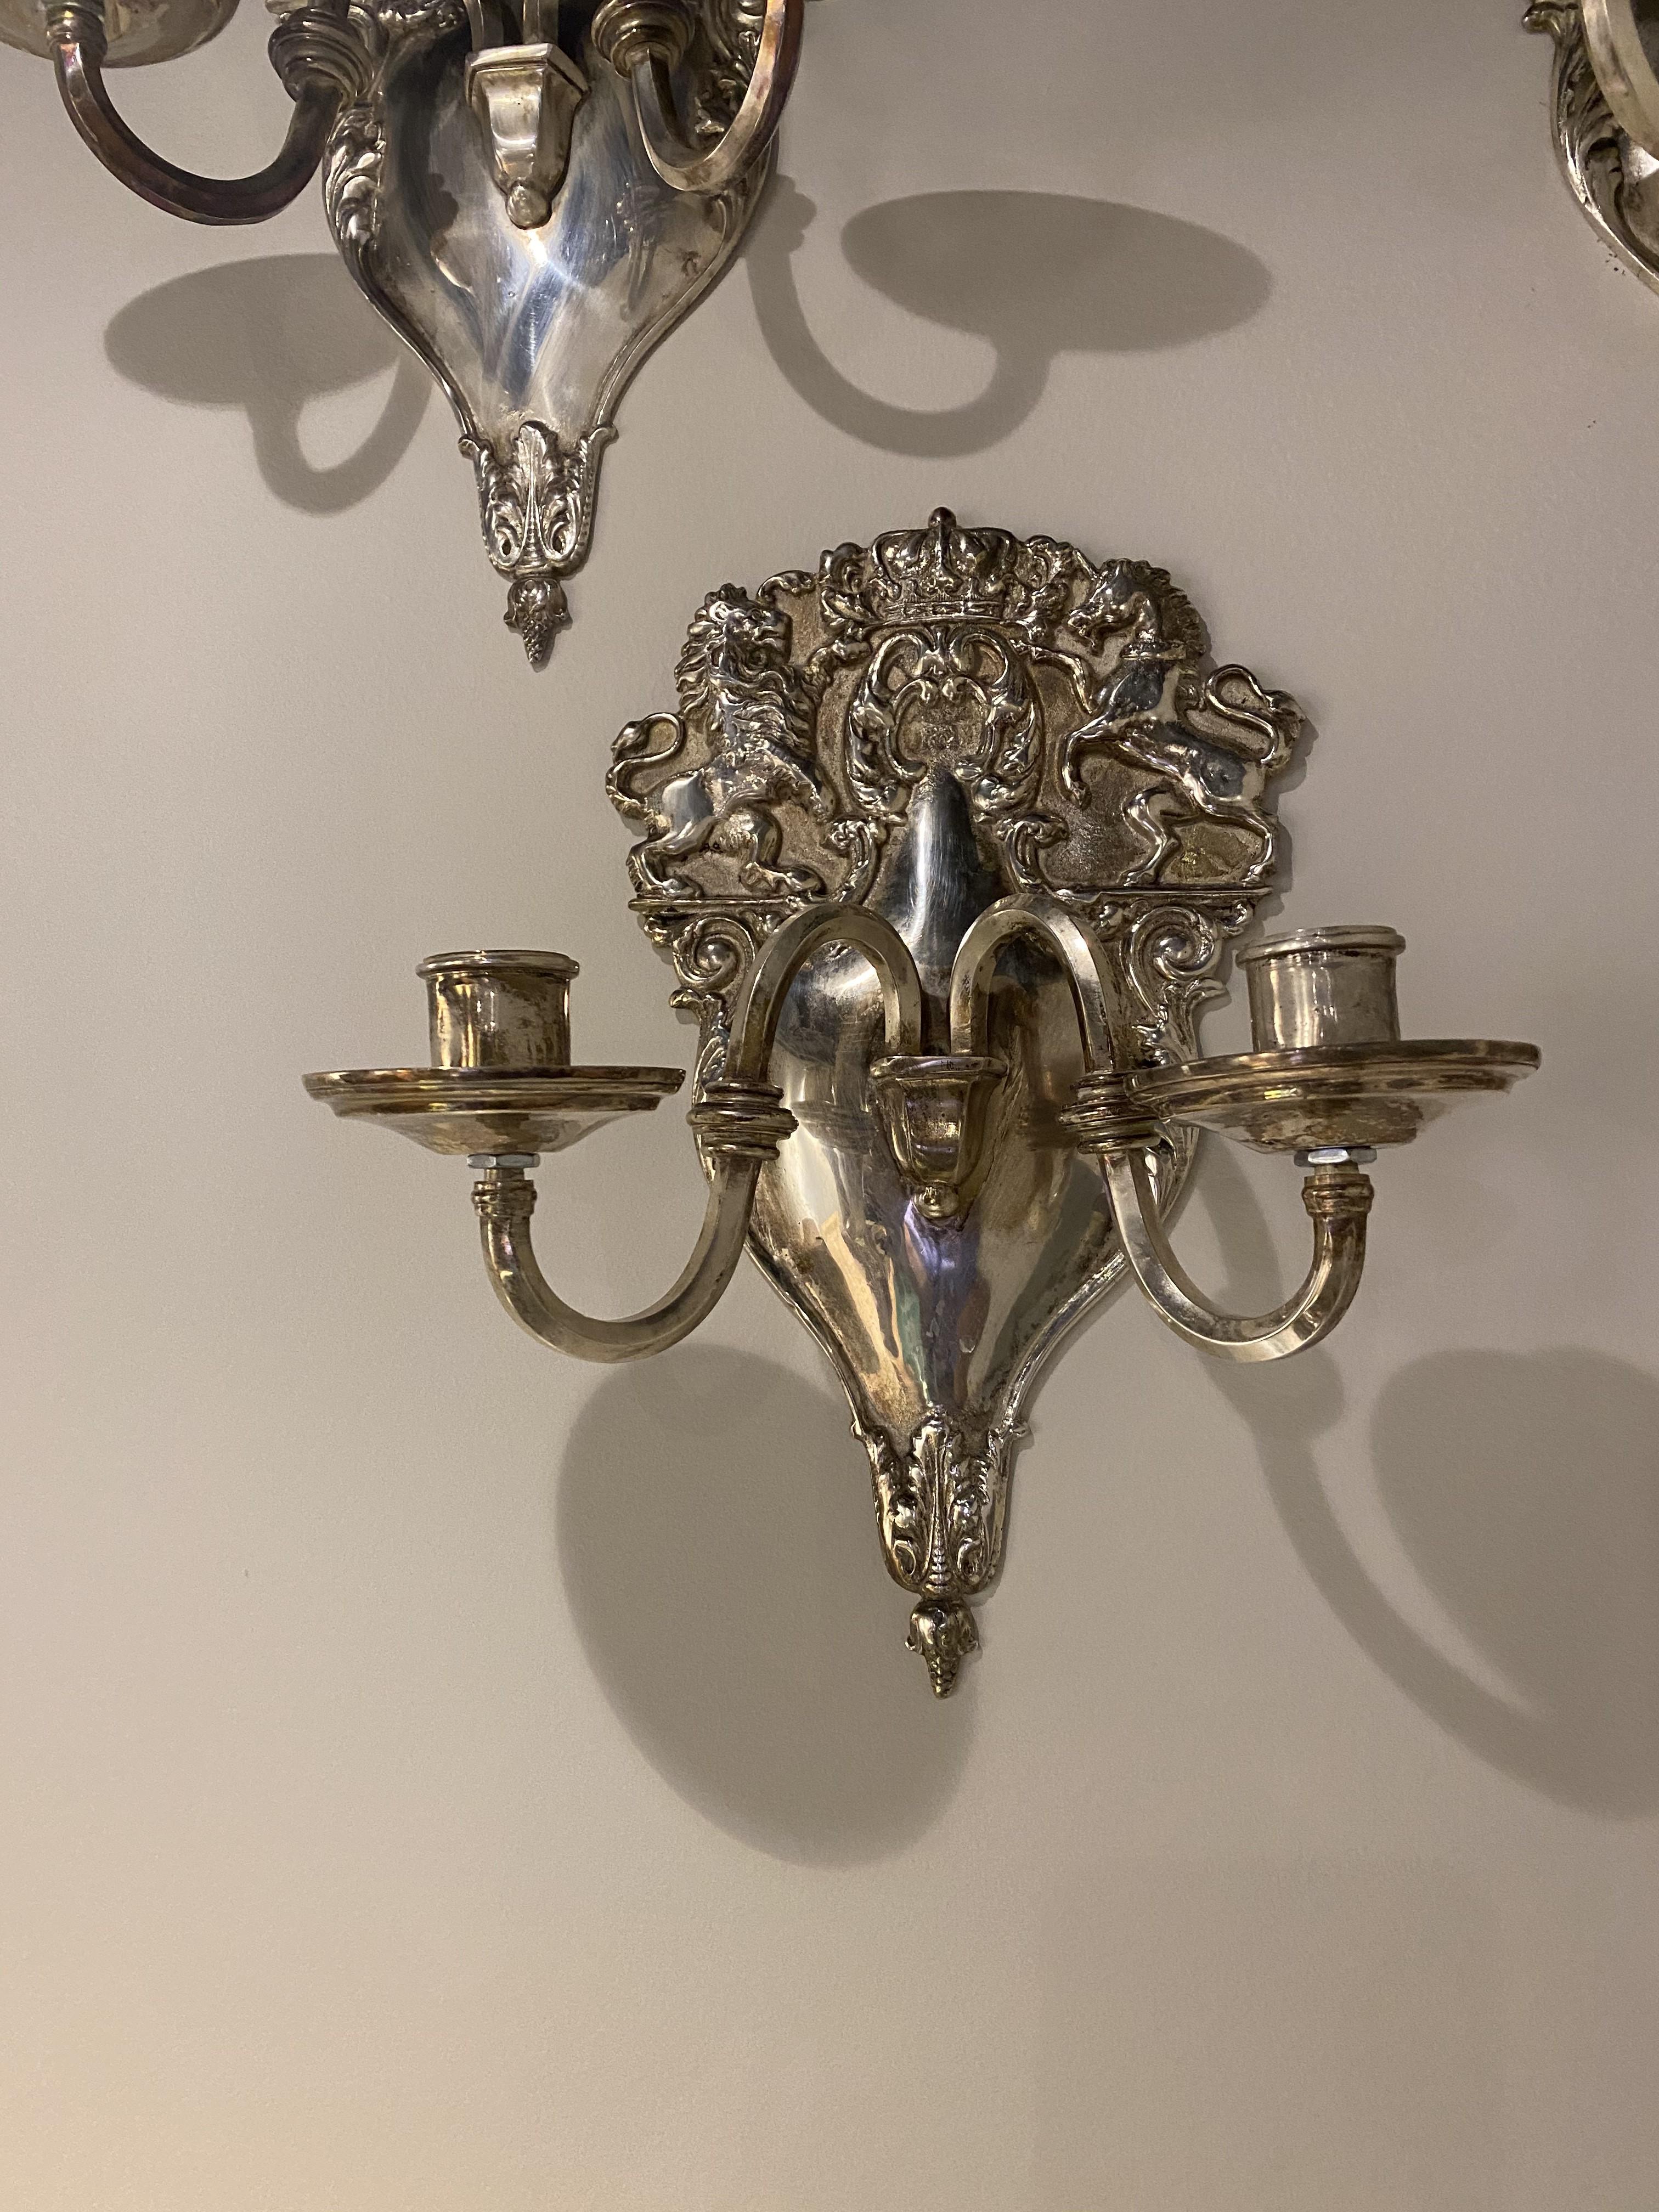 1920's English Silver Plated Sconces with Heraldry Design In Good Condition For Sale In New York, NY